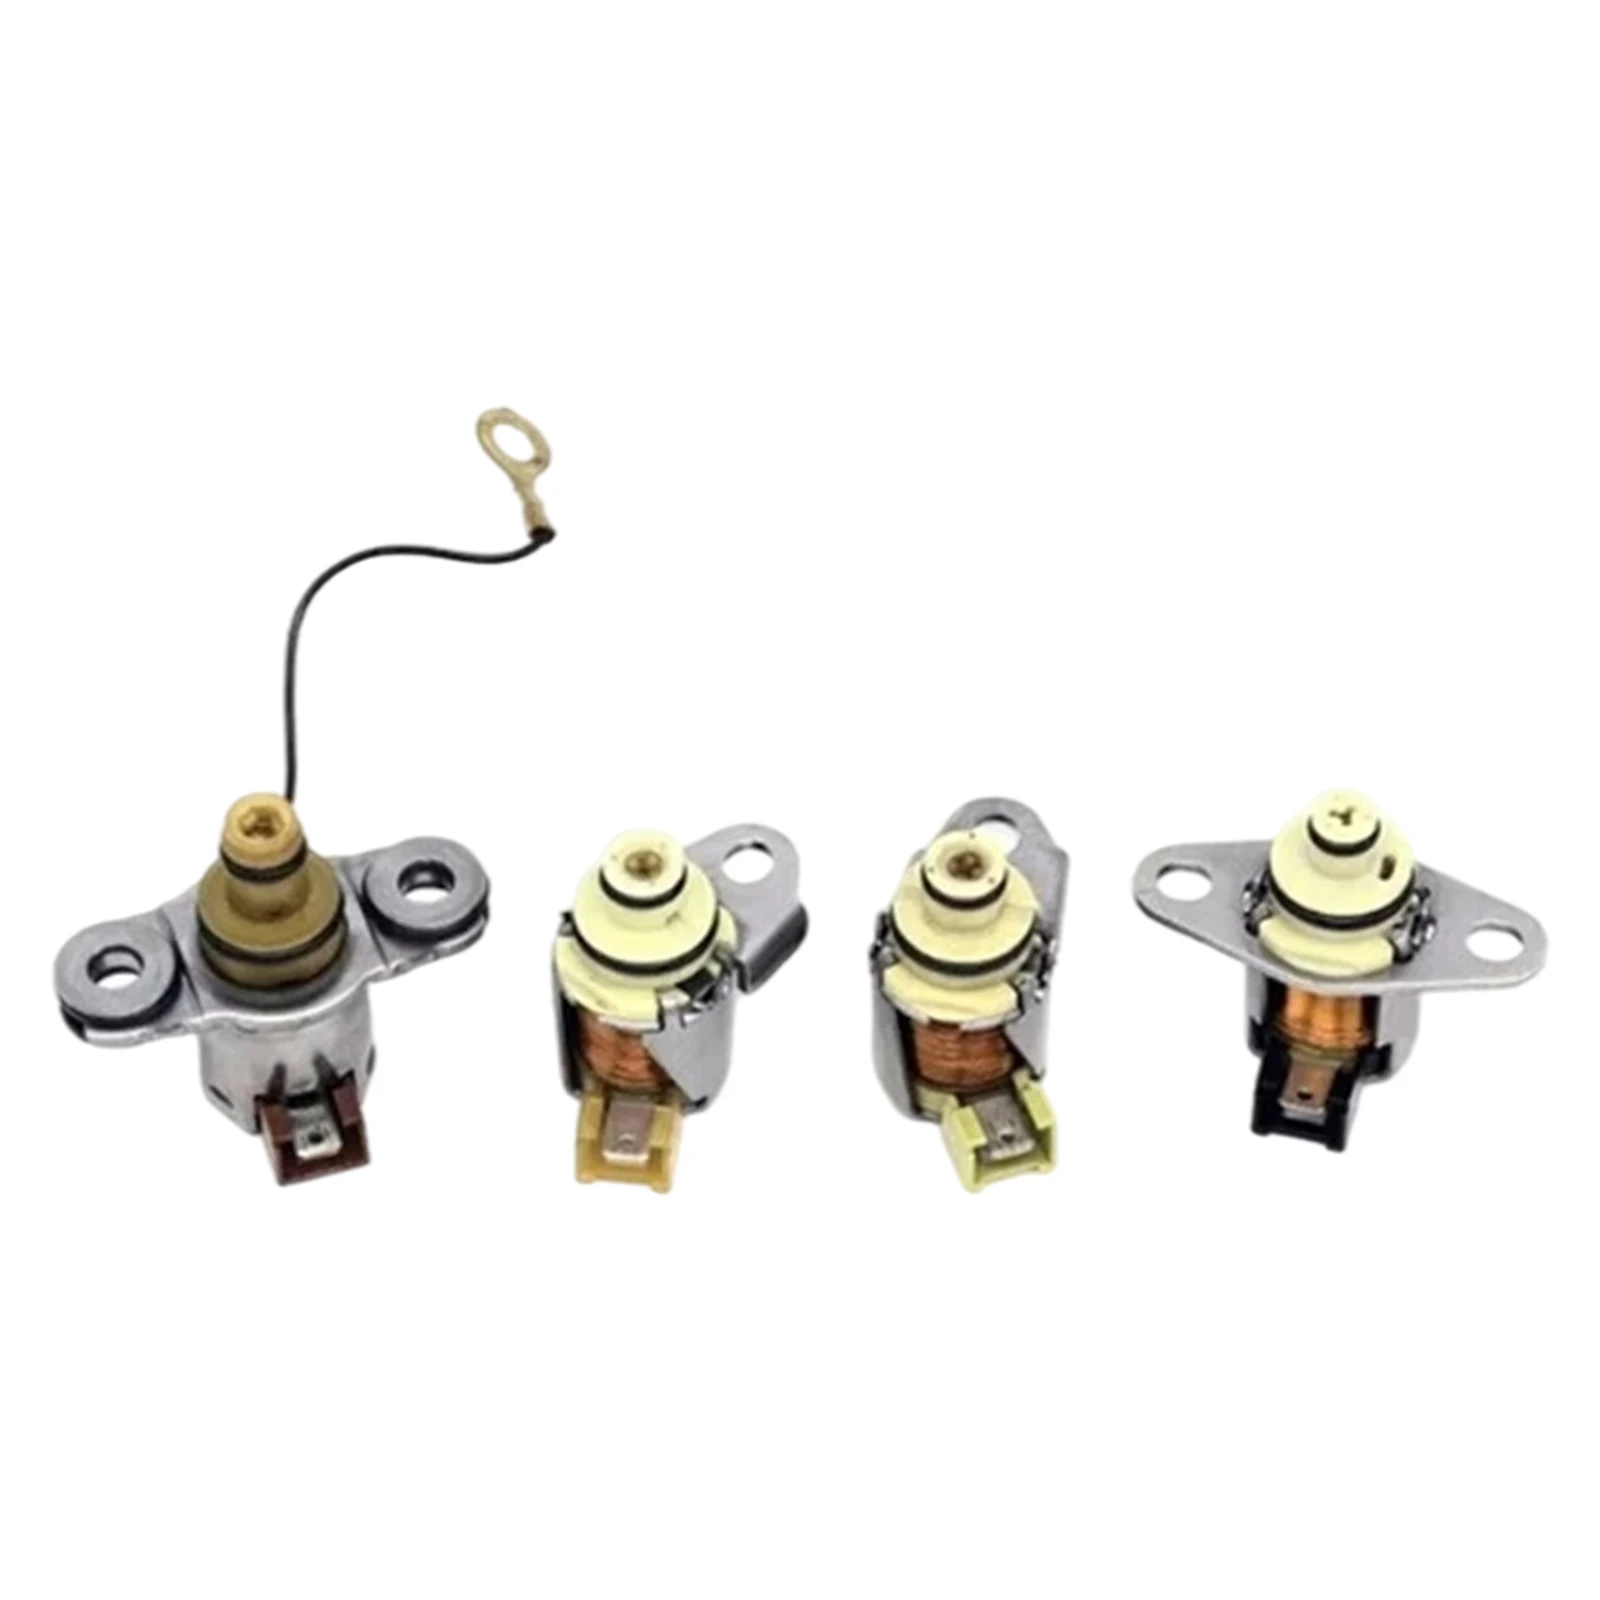 4x JF402E JF405E G6T46571 45663-02700 Transmiion Solenoids, Replacement Acceories Supplies for Chevolet Series